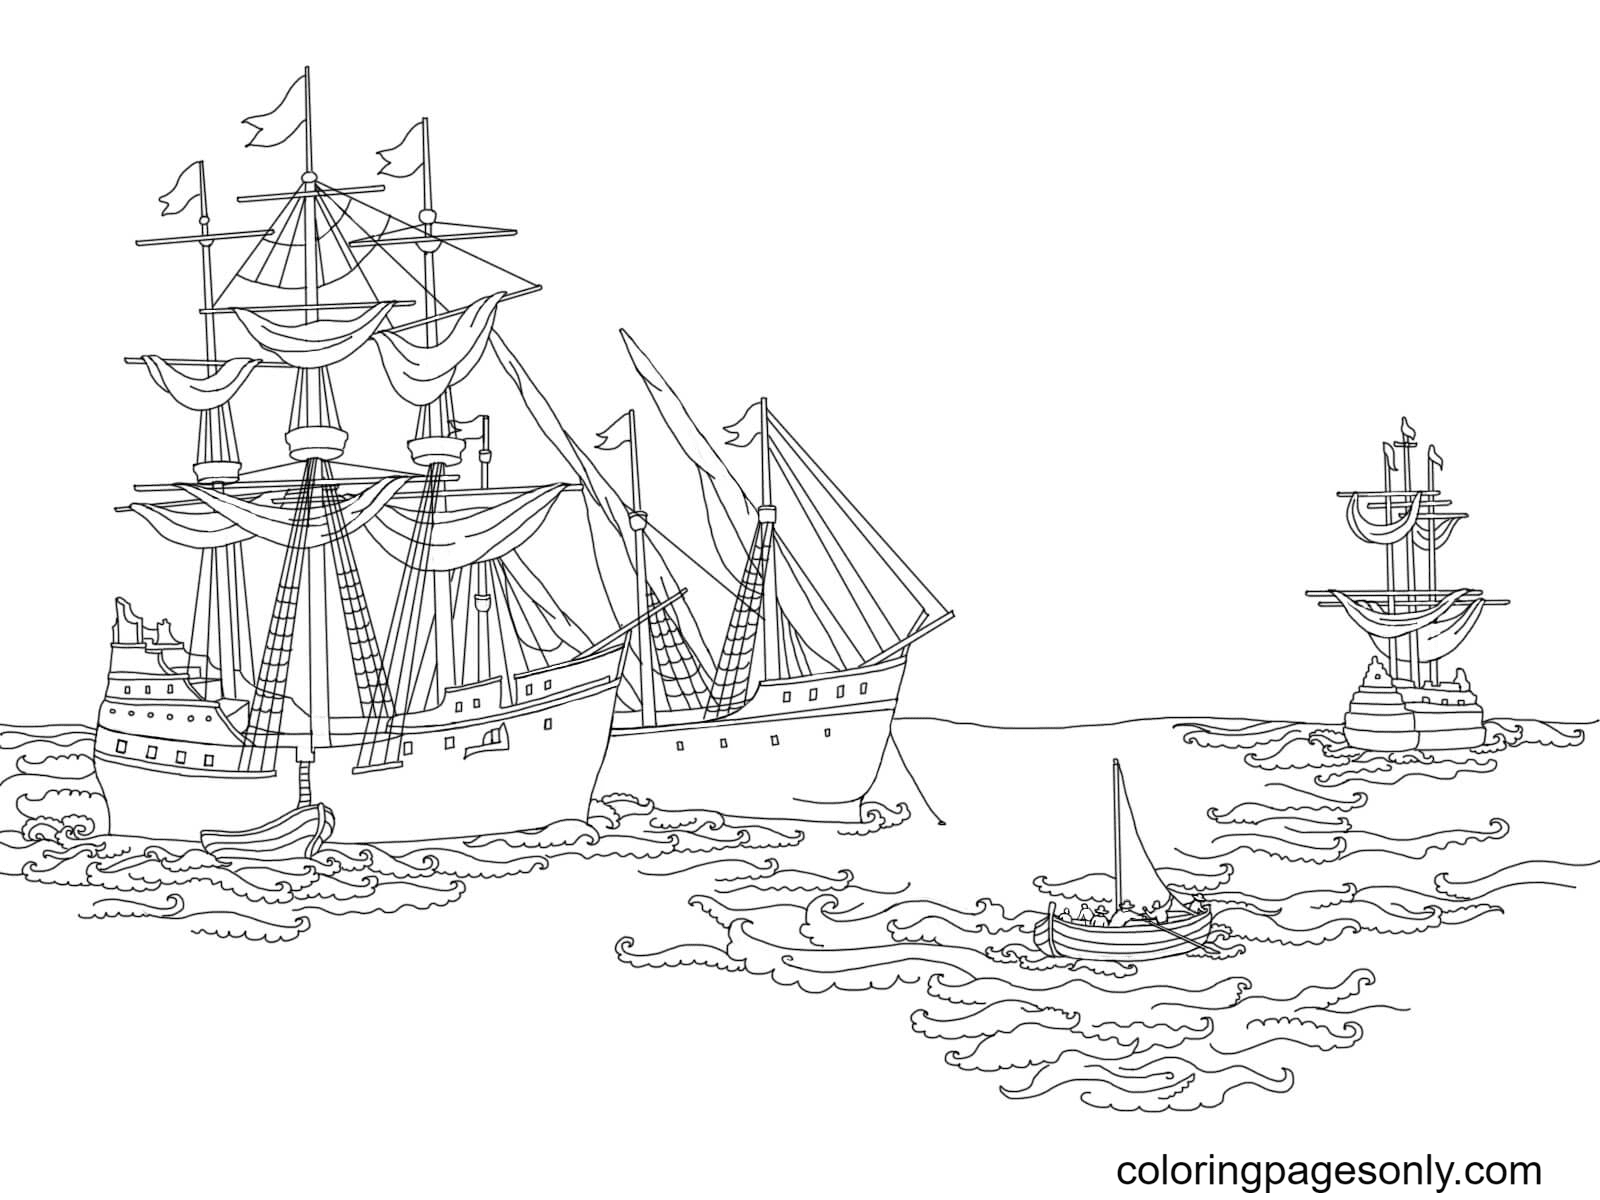 Ships of Columbus Coloring Page